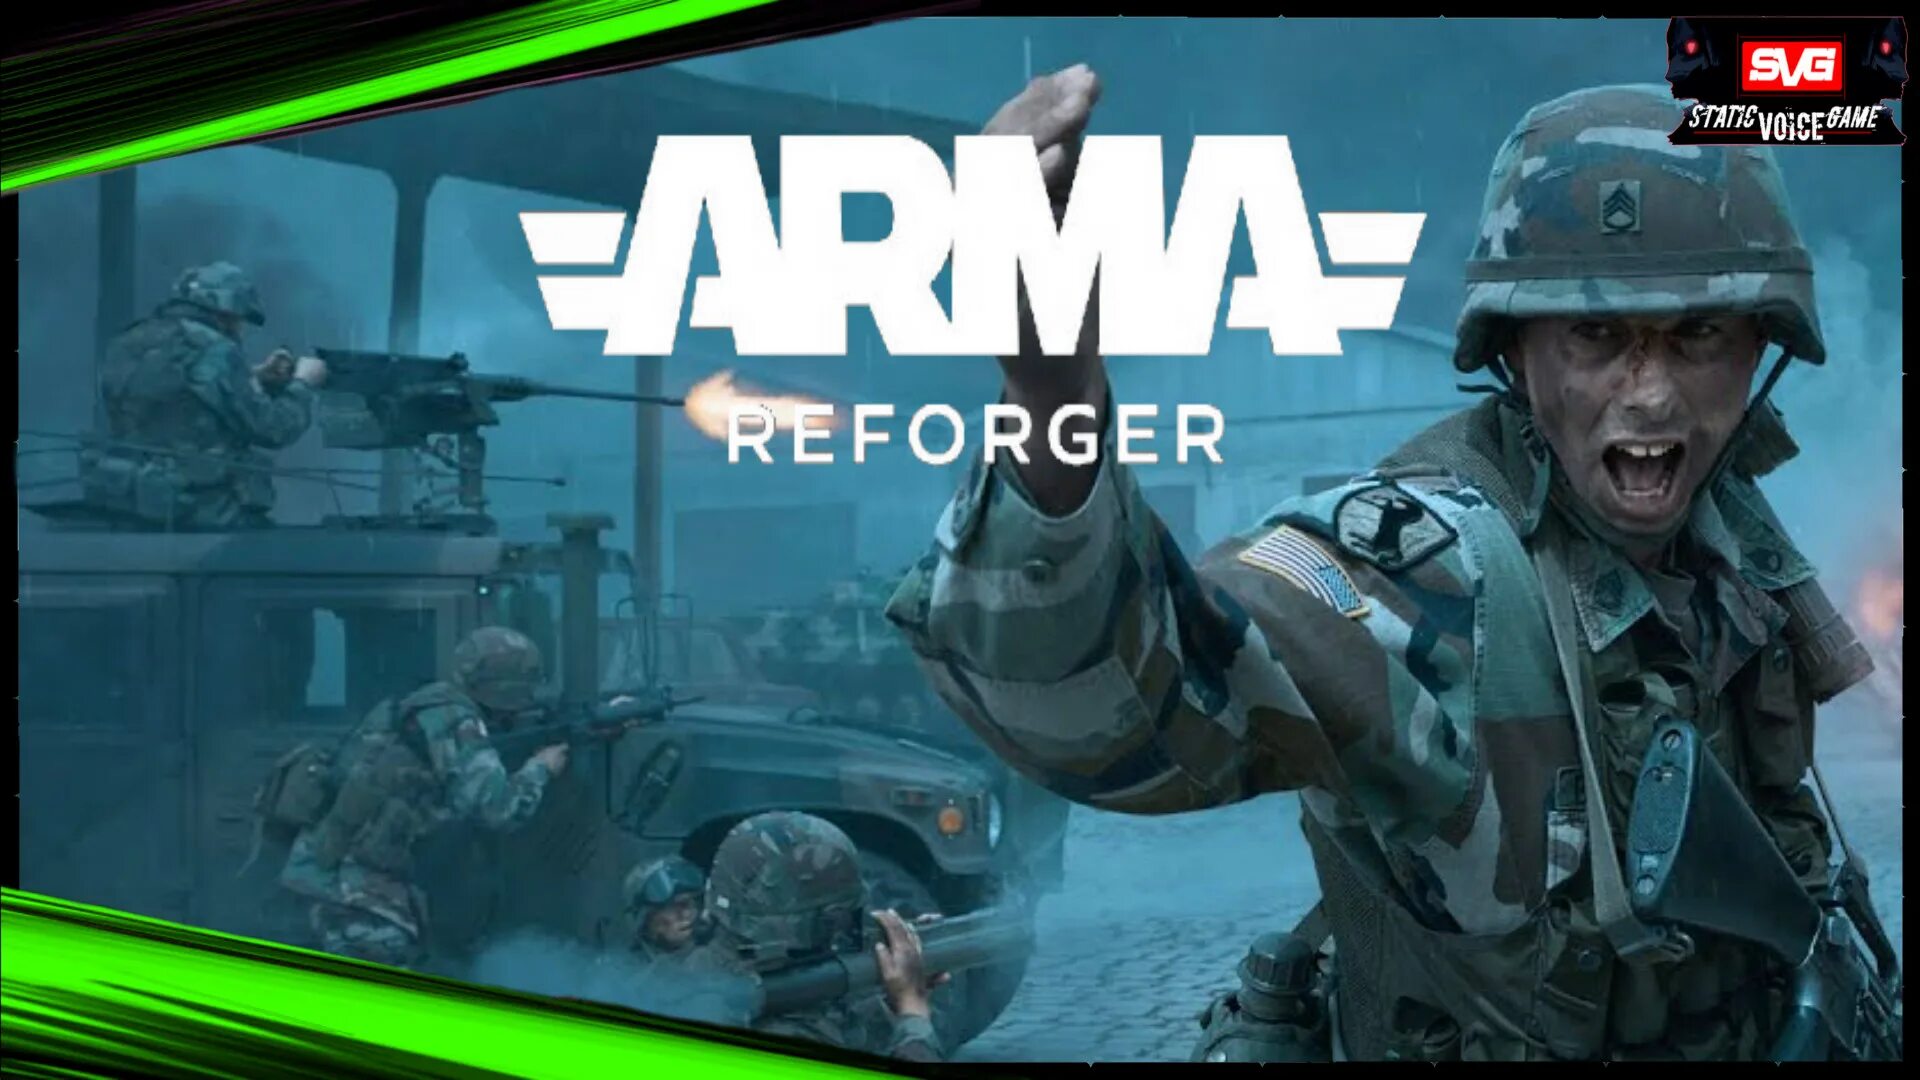 Arma reforger life. Арма 2022. Arma Reforger геймплей. Арма Reforger 2023. Arma Reforger обнова.